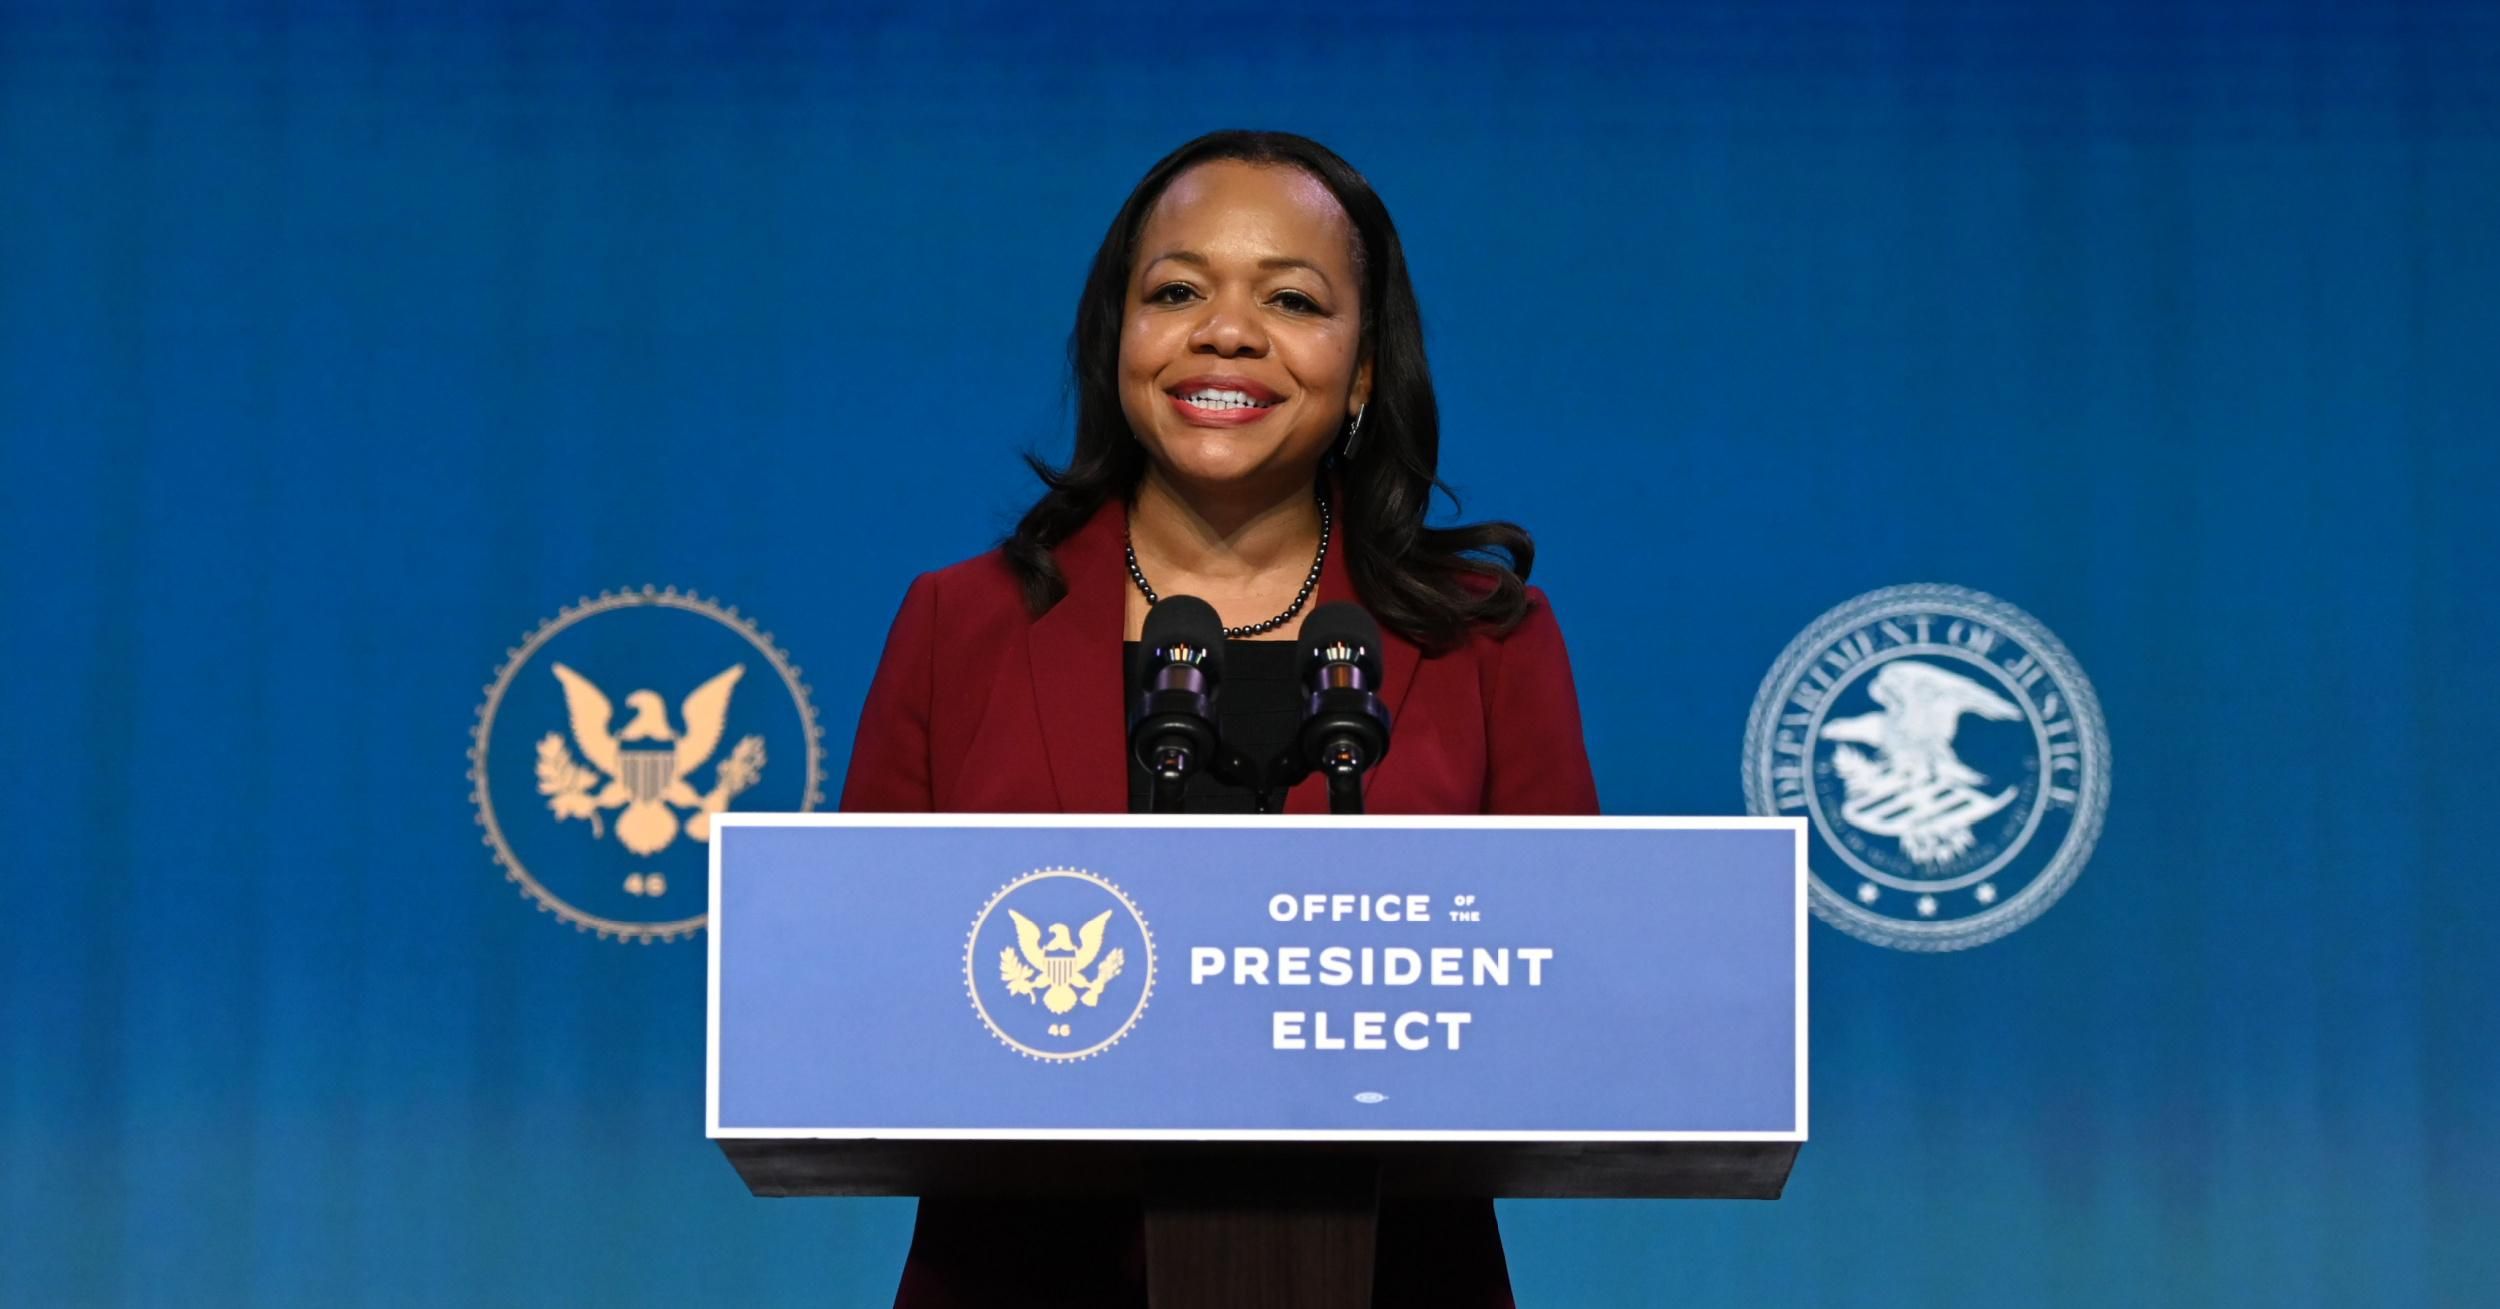 Kristen Clarke, then-nominee for assistant attorney general for civil rights at the U.S. Department of Justice, speaks after being nominated by President-elect Joe Biden at the Queen theater on January 7, 2021 in Wilmington, Delaware. (Photo: Jim Watson/AFP via Getty Images)